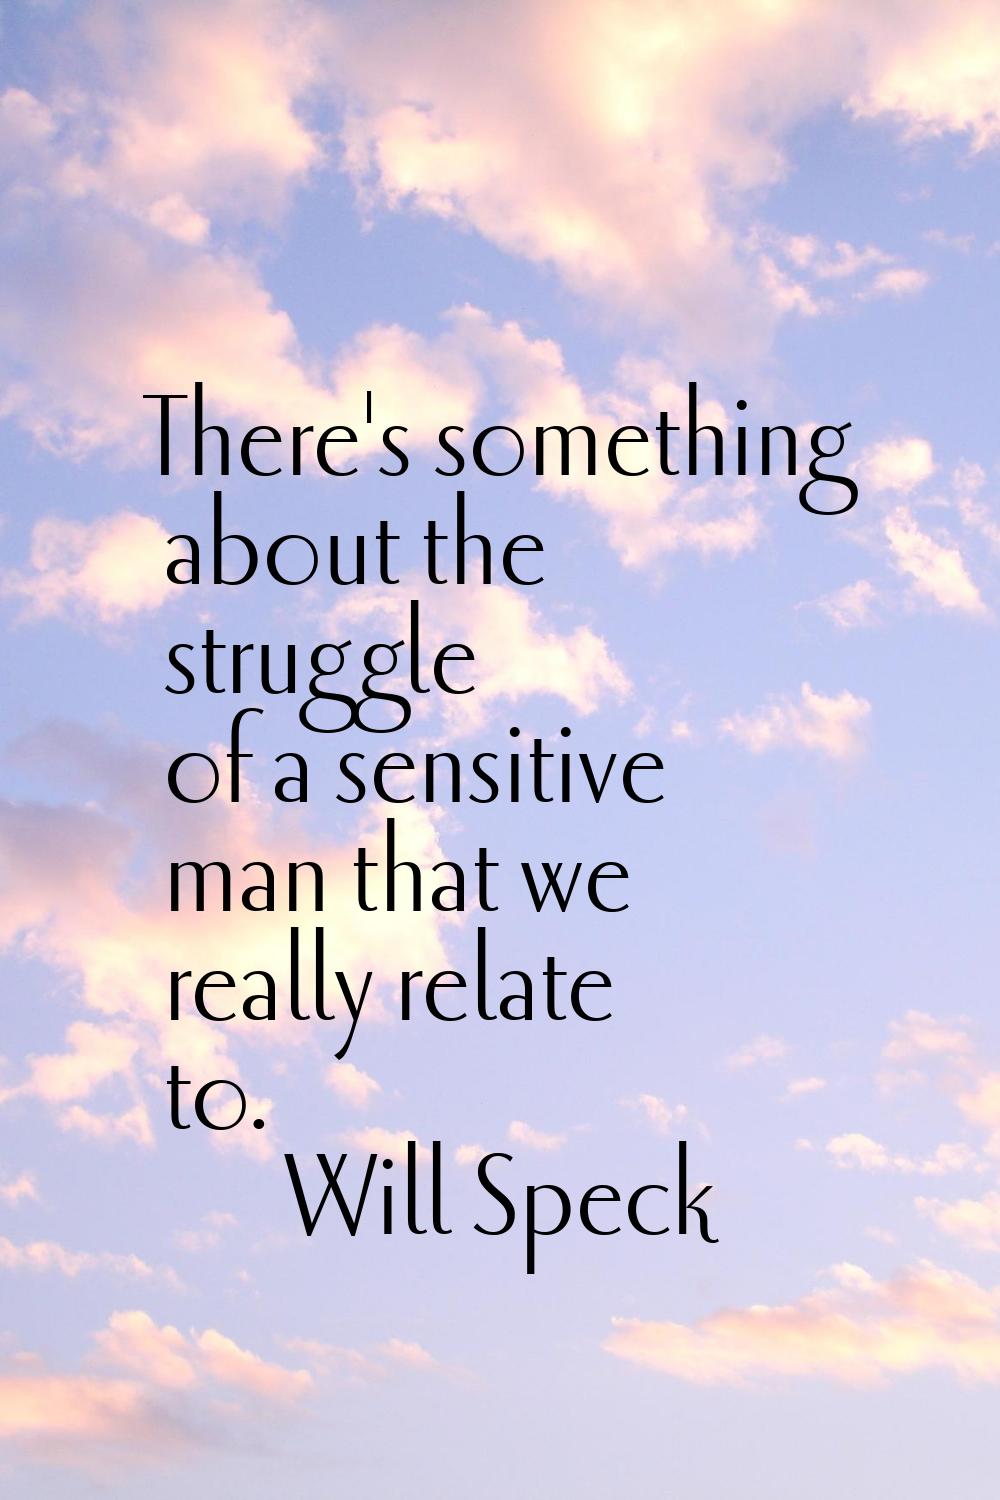 There's something about the struggle of a sensitive man that we really relate to.